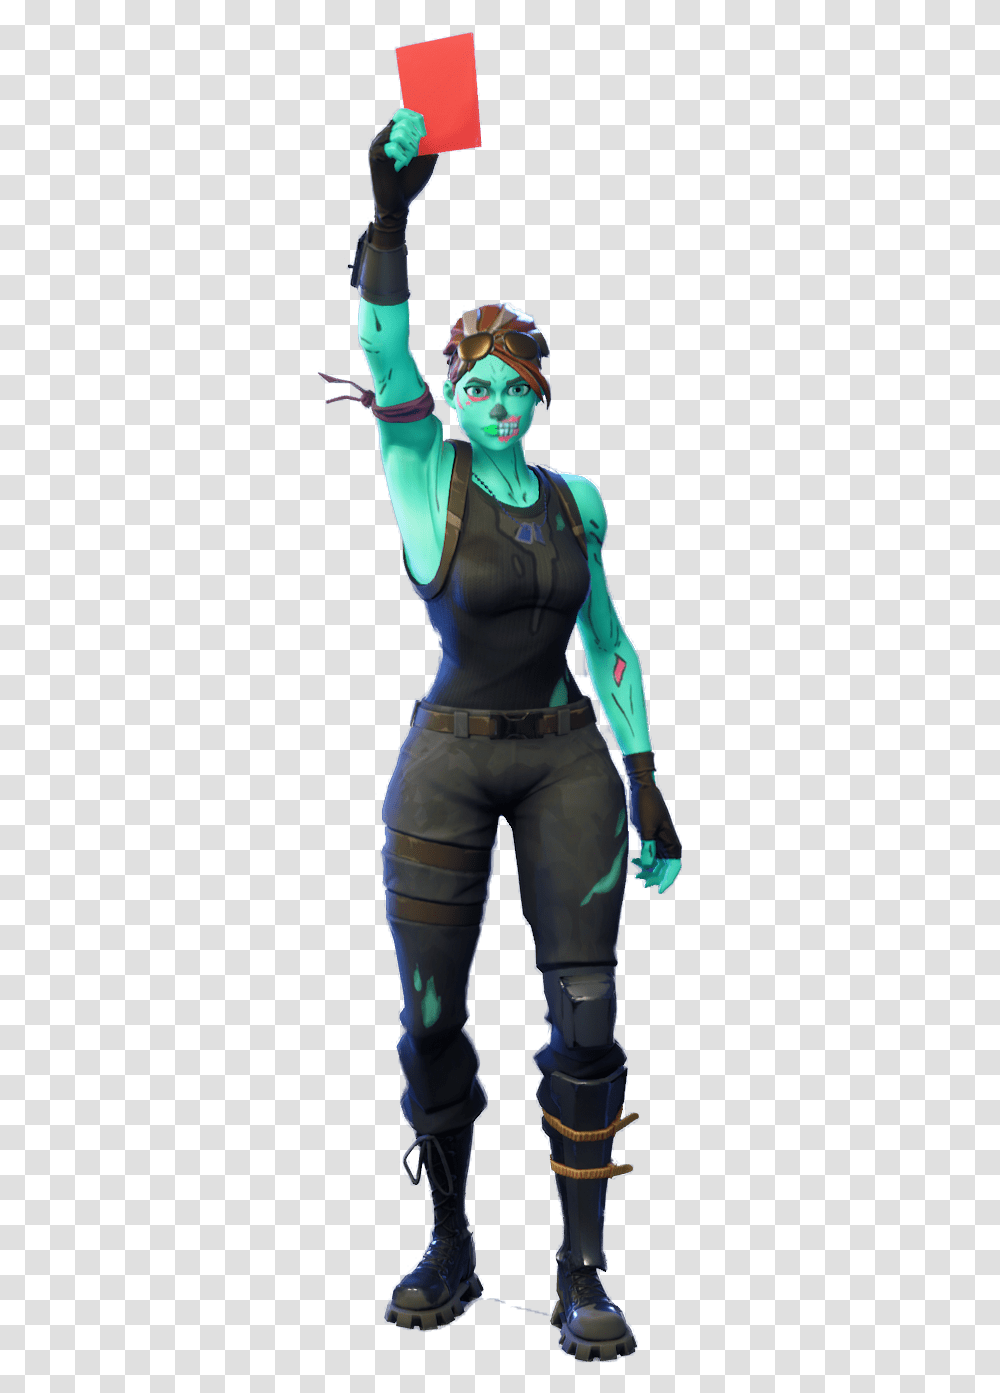 Uncommon Red Card Emote Fortnite Cosmetic Cost 200 Fortnite Ghoul Trooper Emote, Person, Outdoors, Ninja Transparent Png